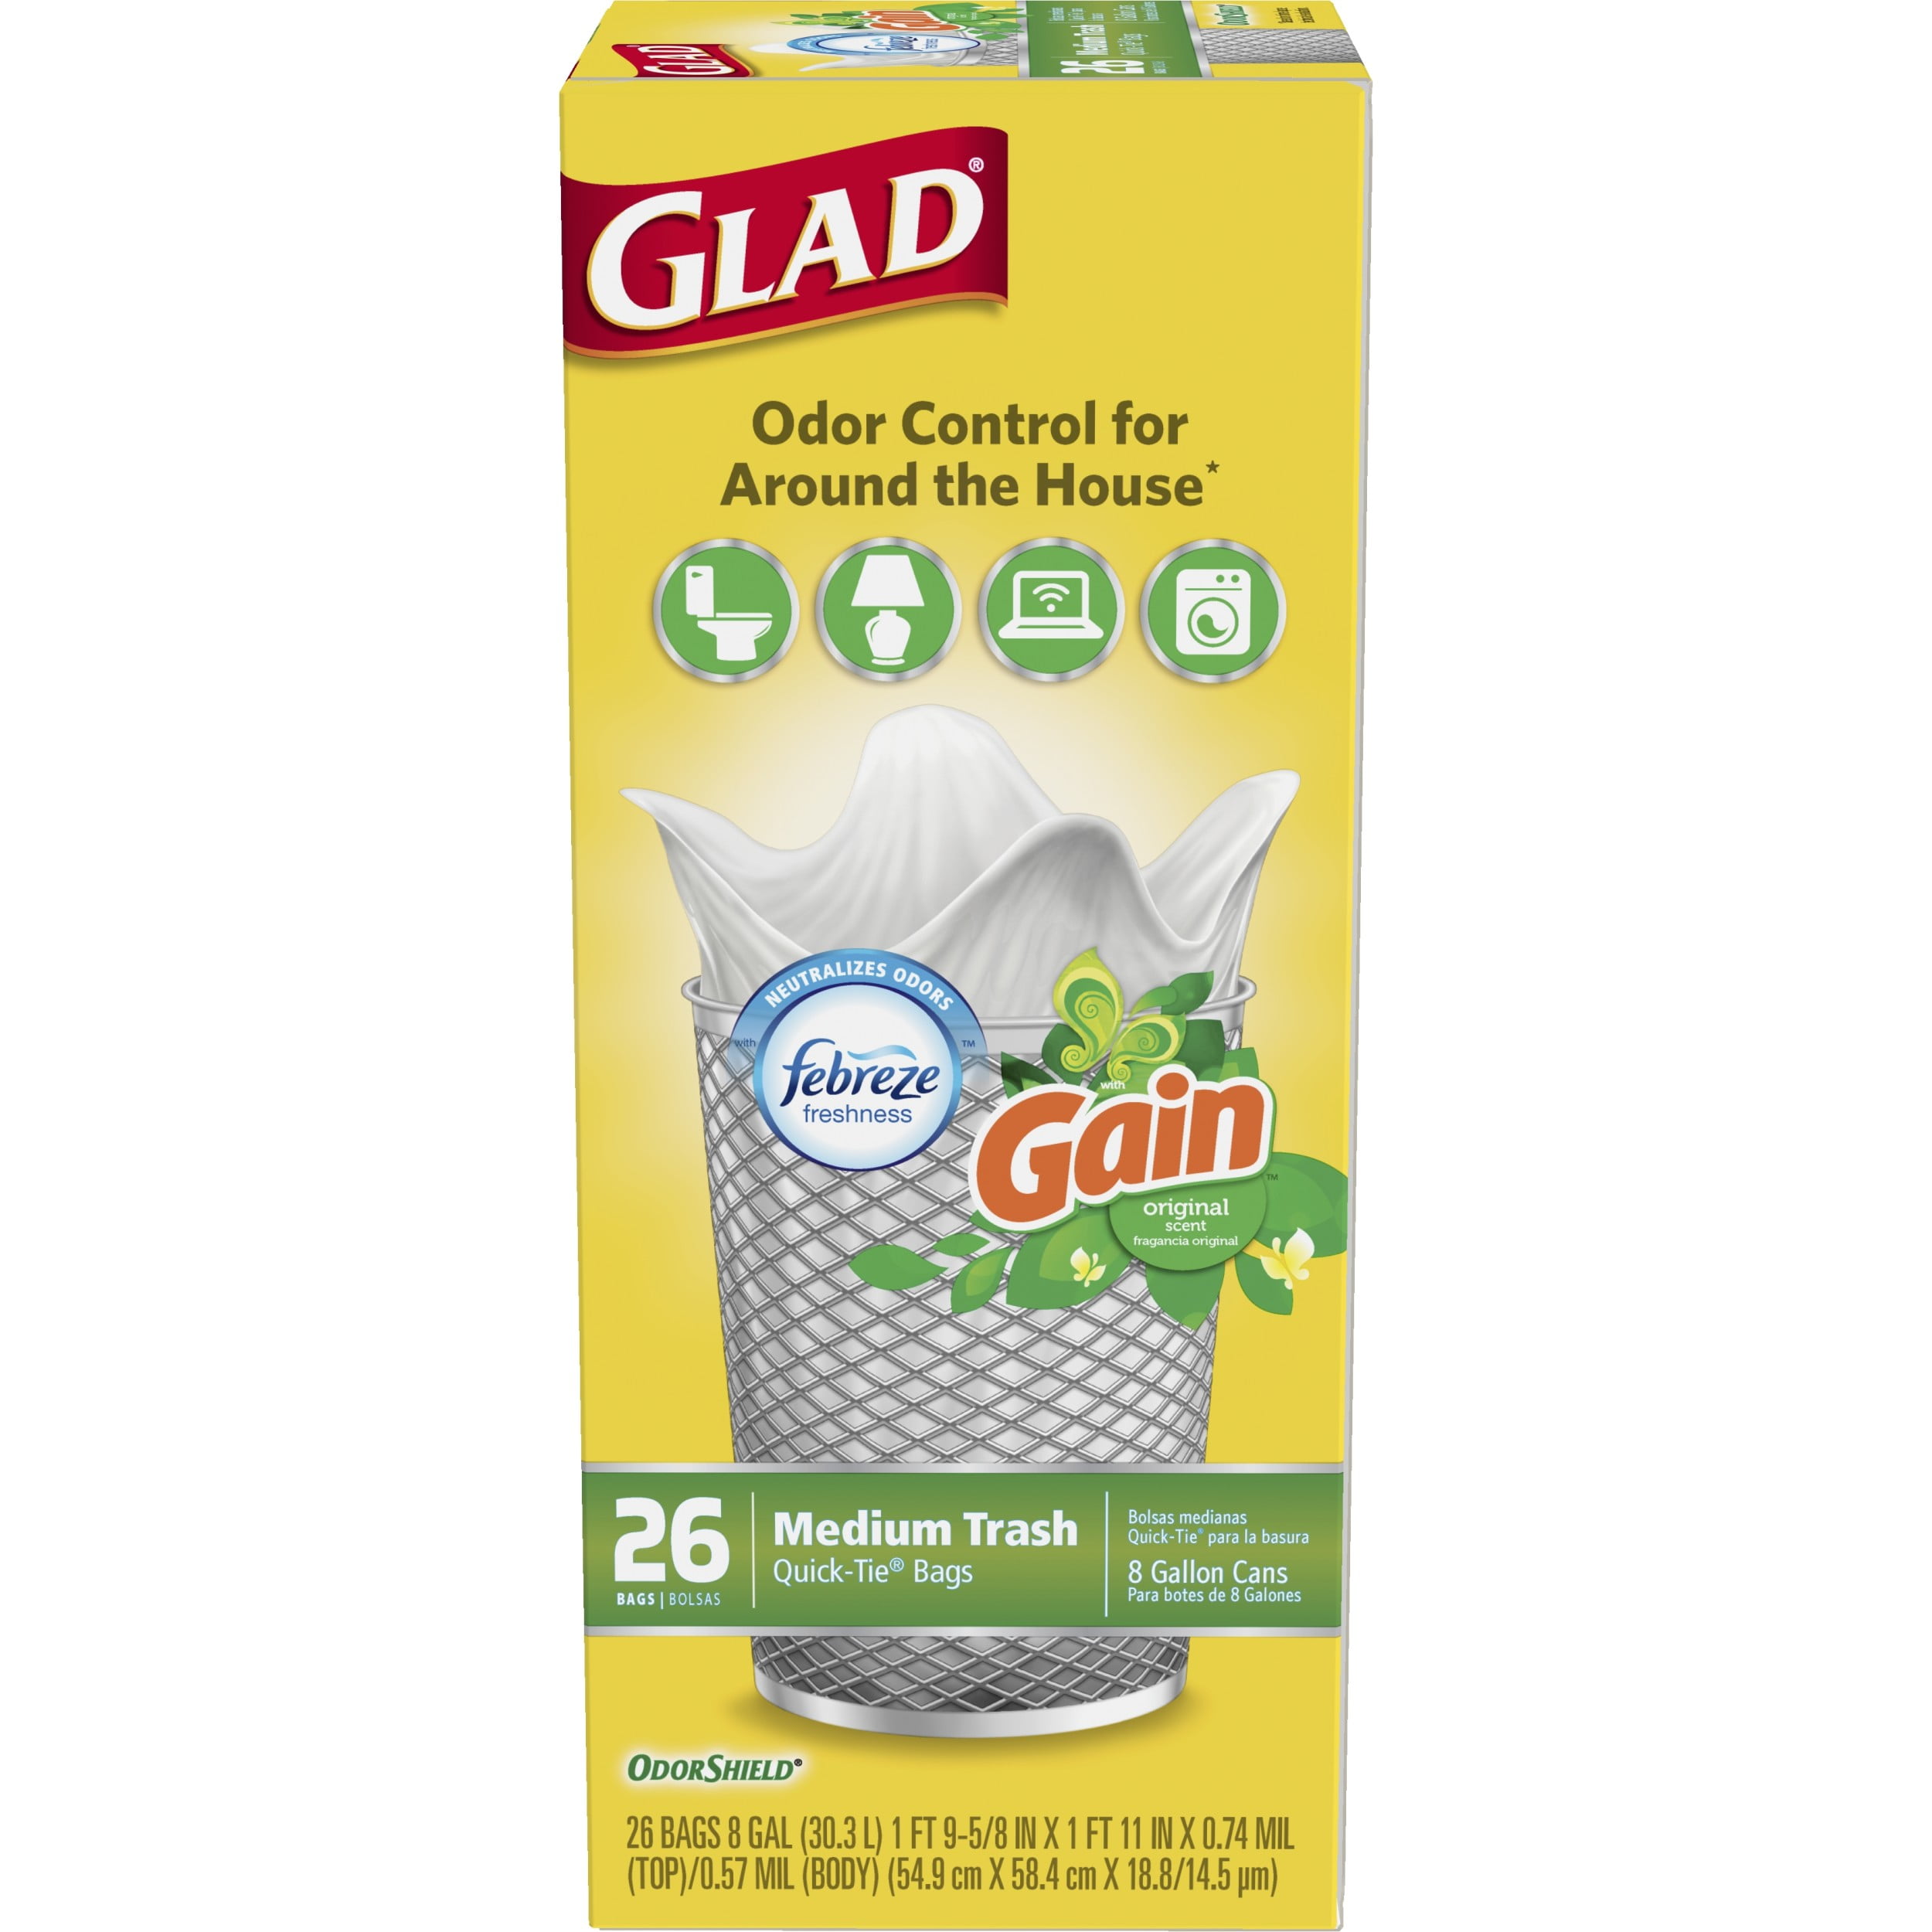  Glad Medium Quick-Tie Trash Bags, OdorShield 8 Gallon, Gain  Original with Febreze, 26 Count(Pack of 6) : Health & Household